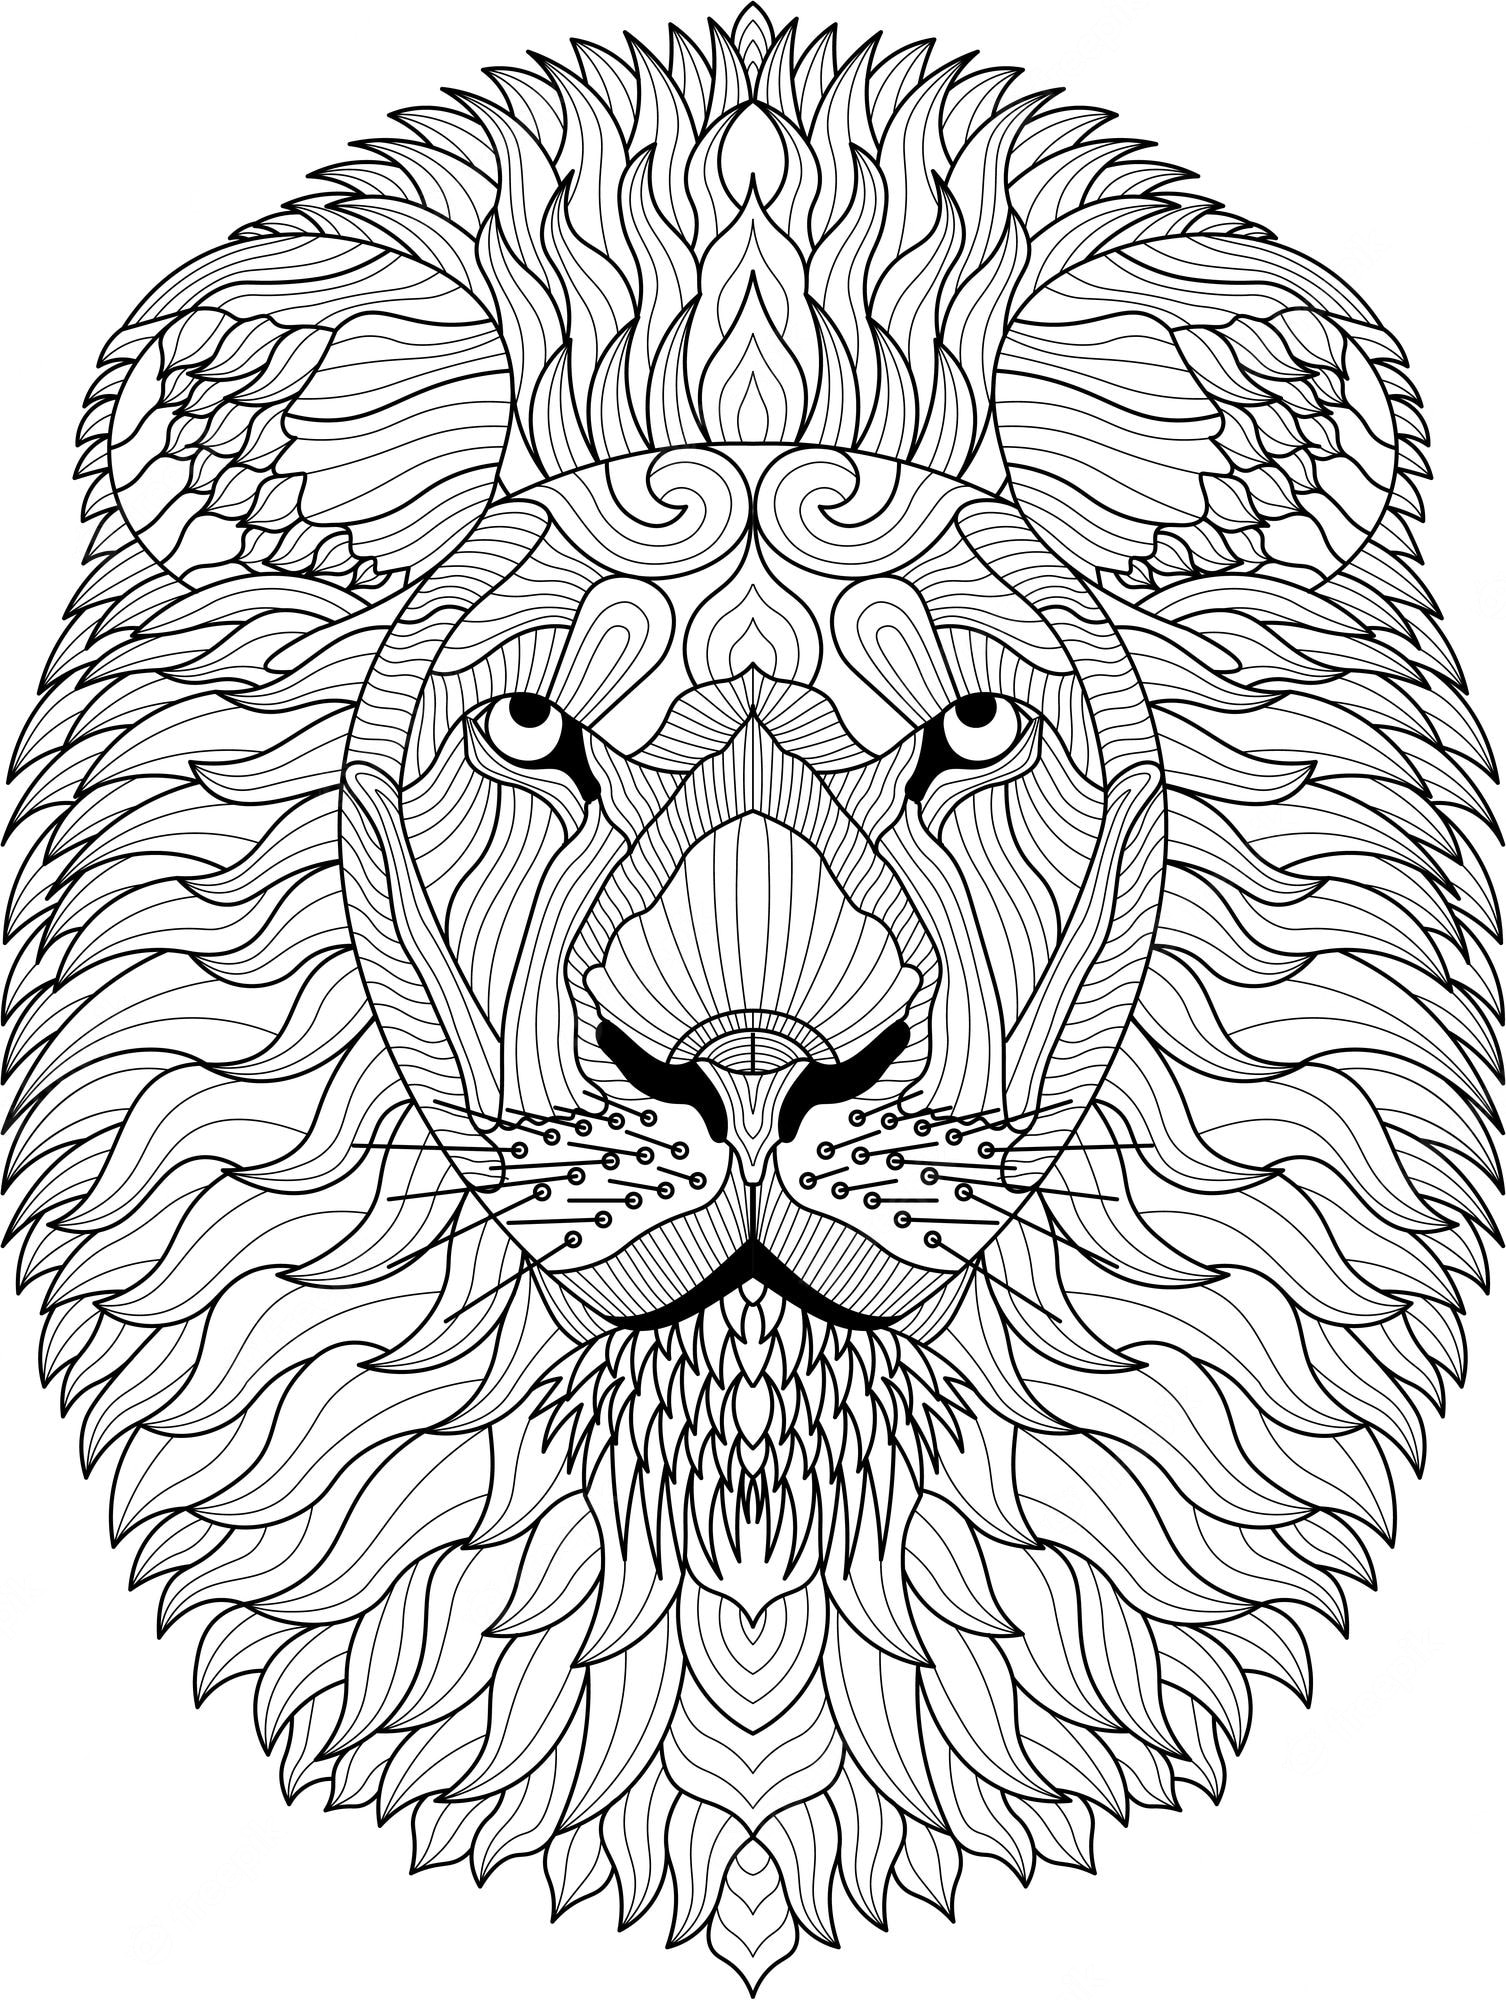 Premium Vector | Zentangle black and white hand drawn lion coloring page  illustration